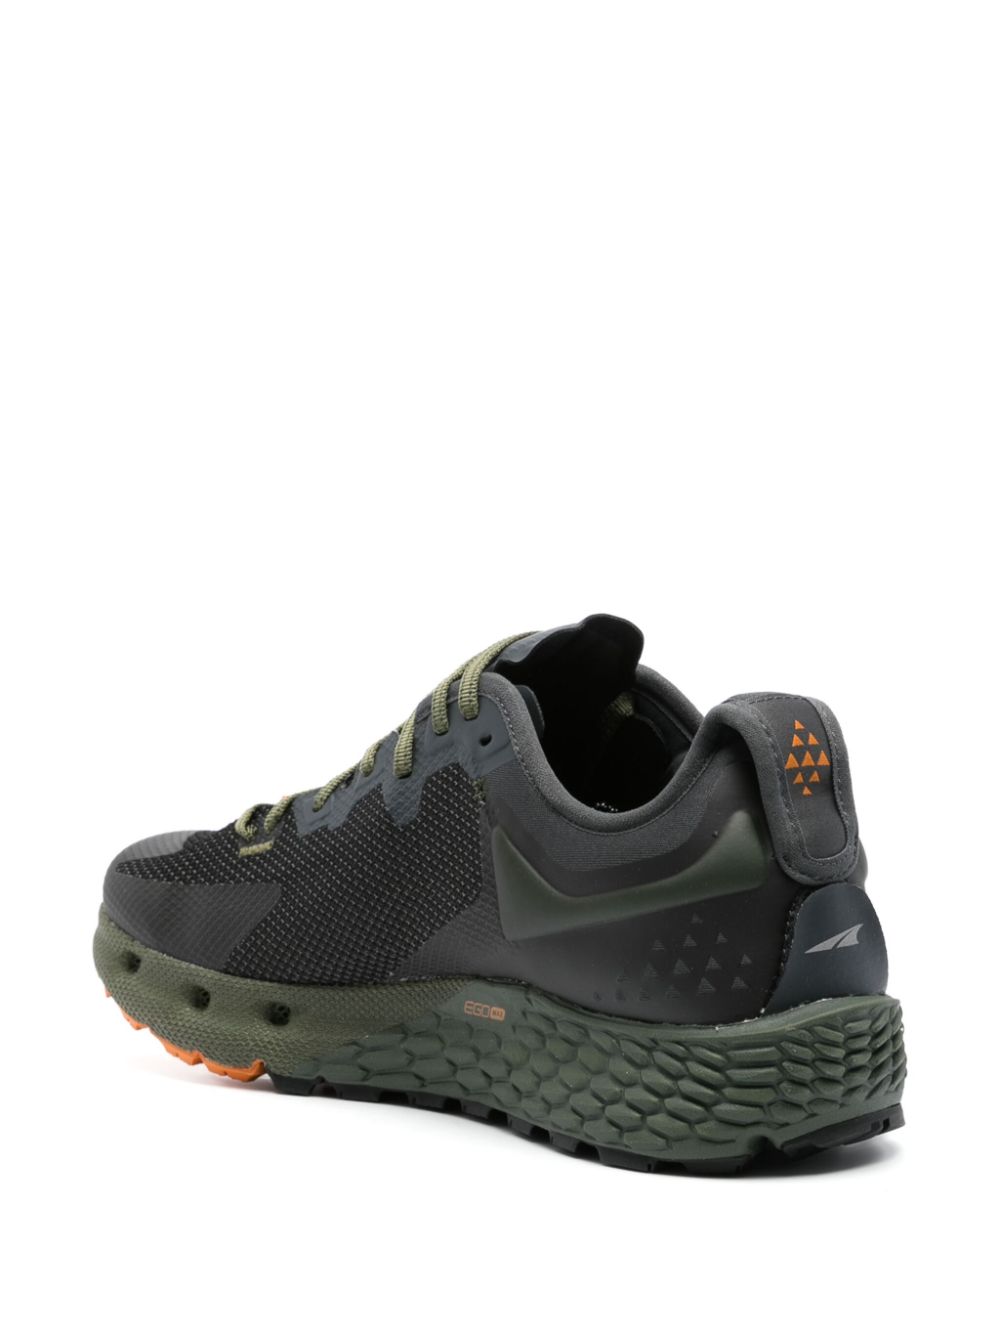 Timp 4 trail sneakers